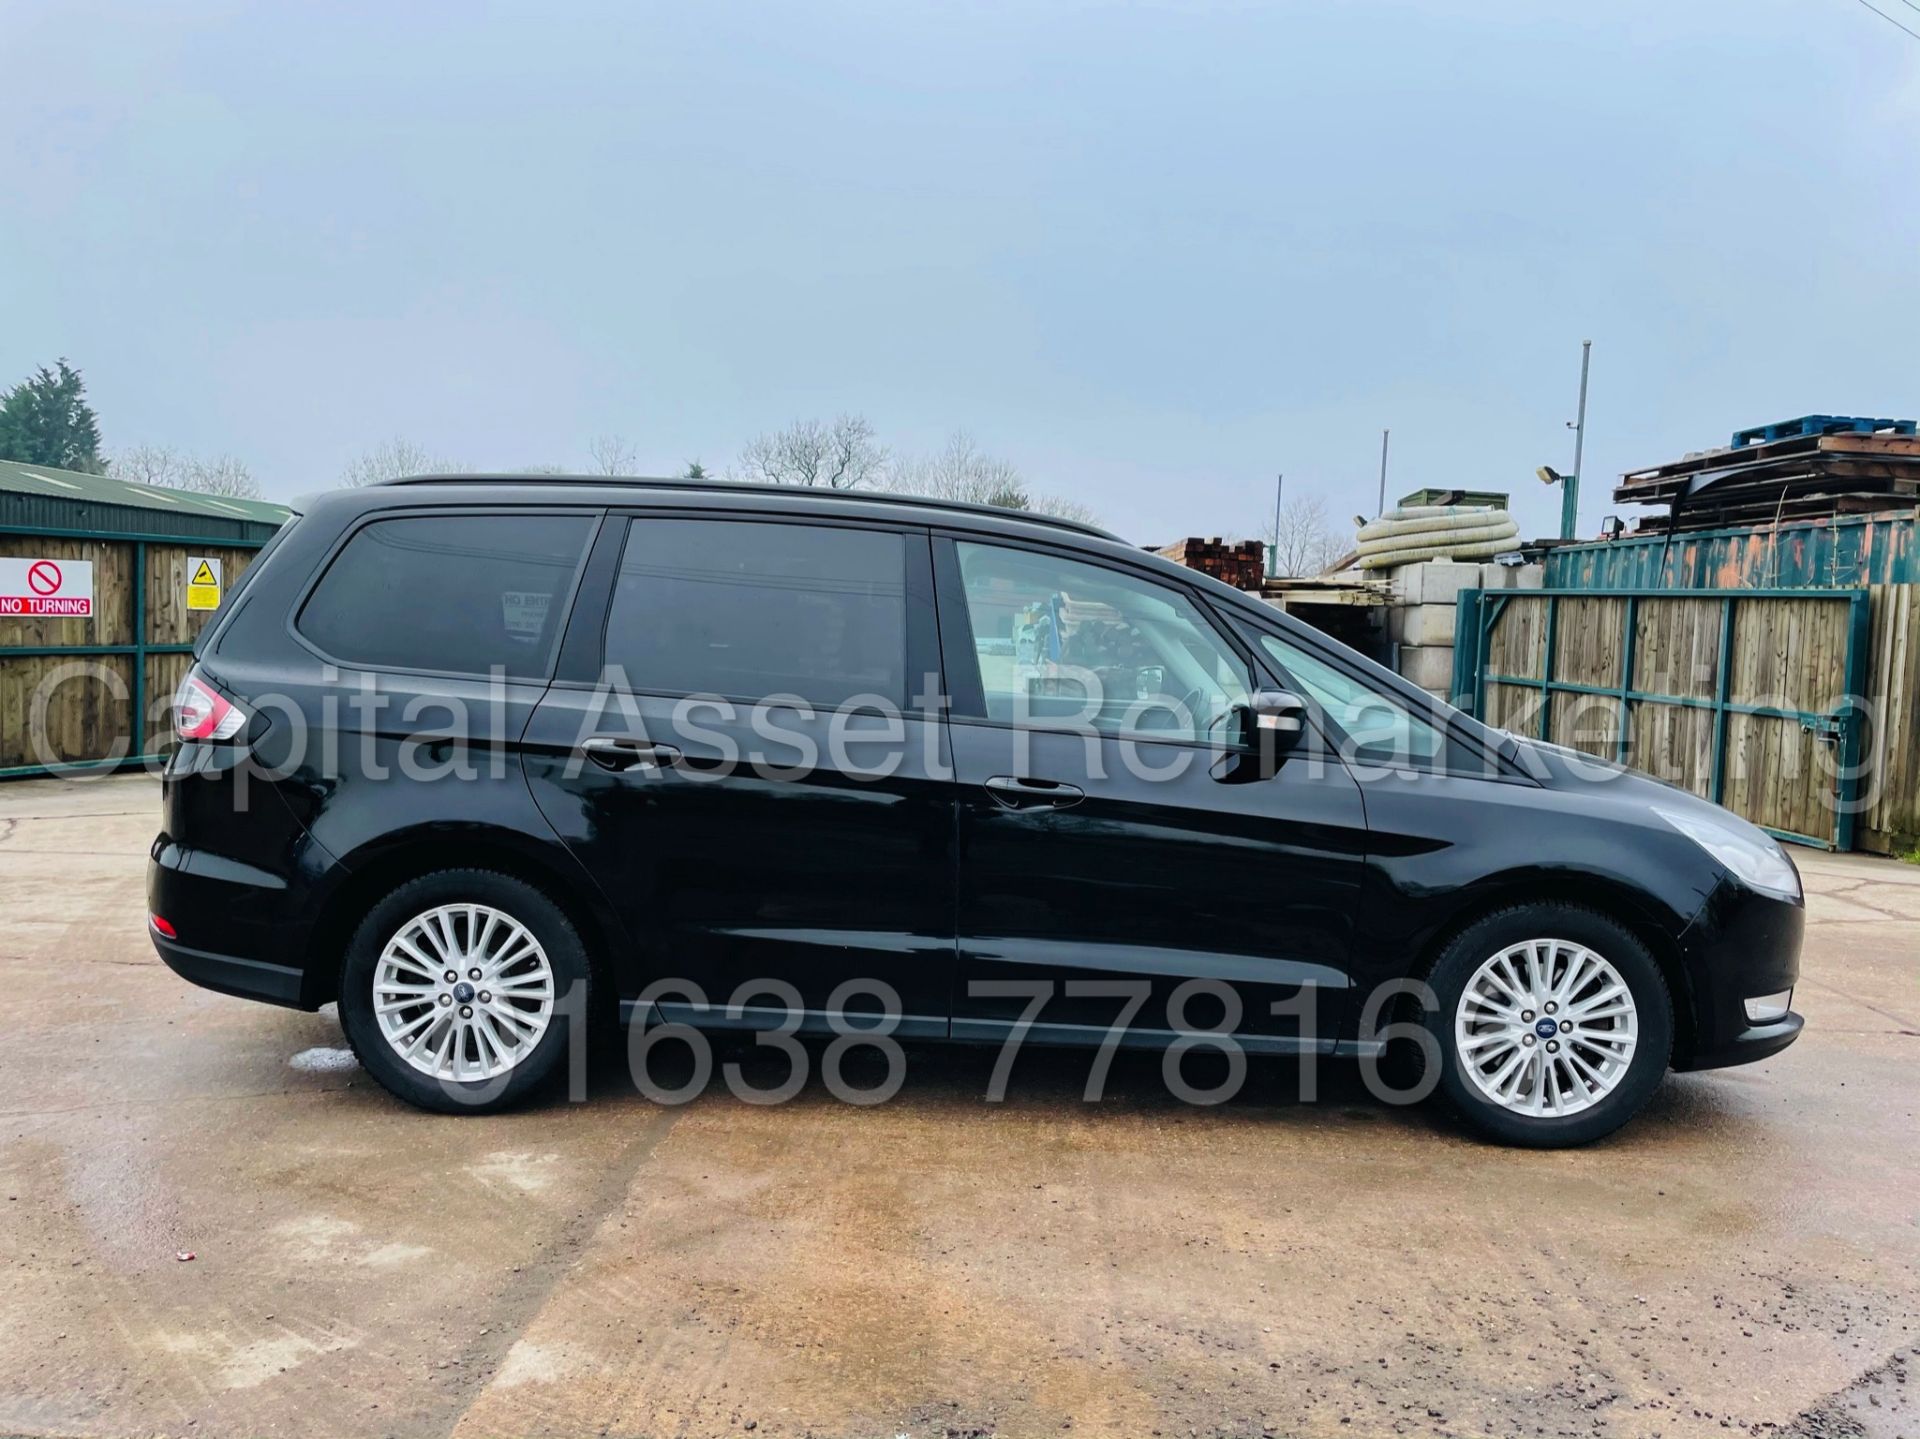 (ON SALE) FORD GALAXY *ZETEC EDITION* 7 SEATER MPV (2017 - EURO 6) '2.0 TDCI - AUTO' (1 OWNER) - Image 10 of 48